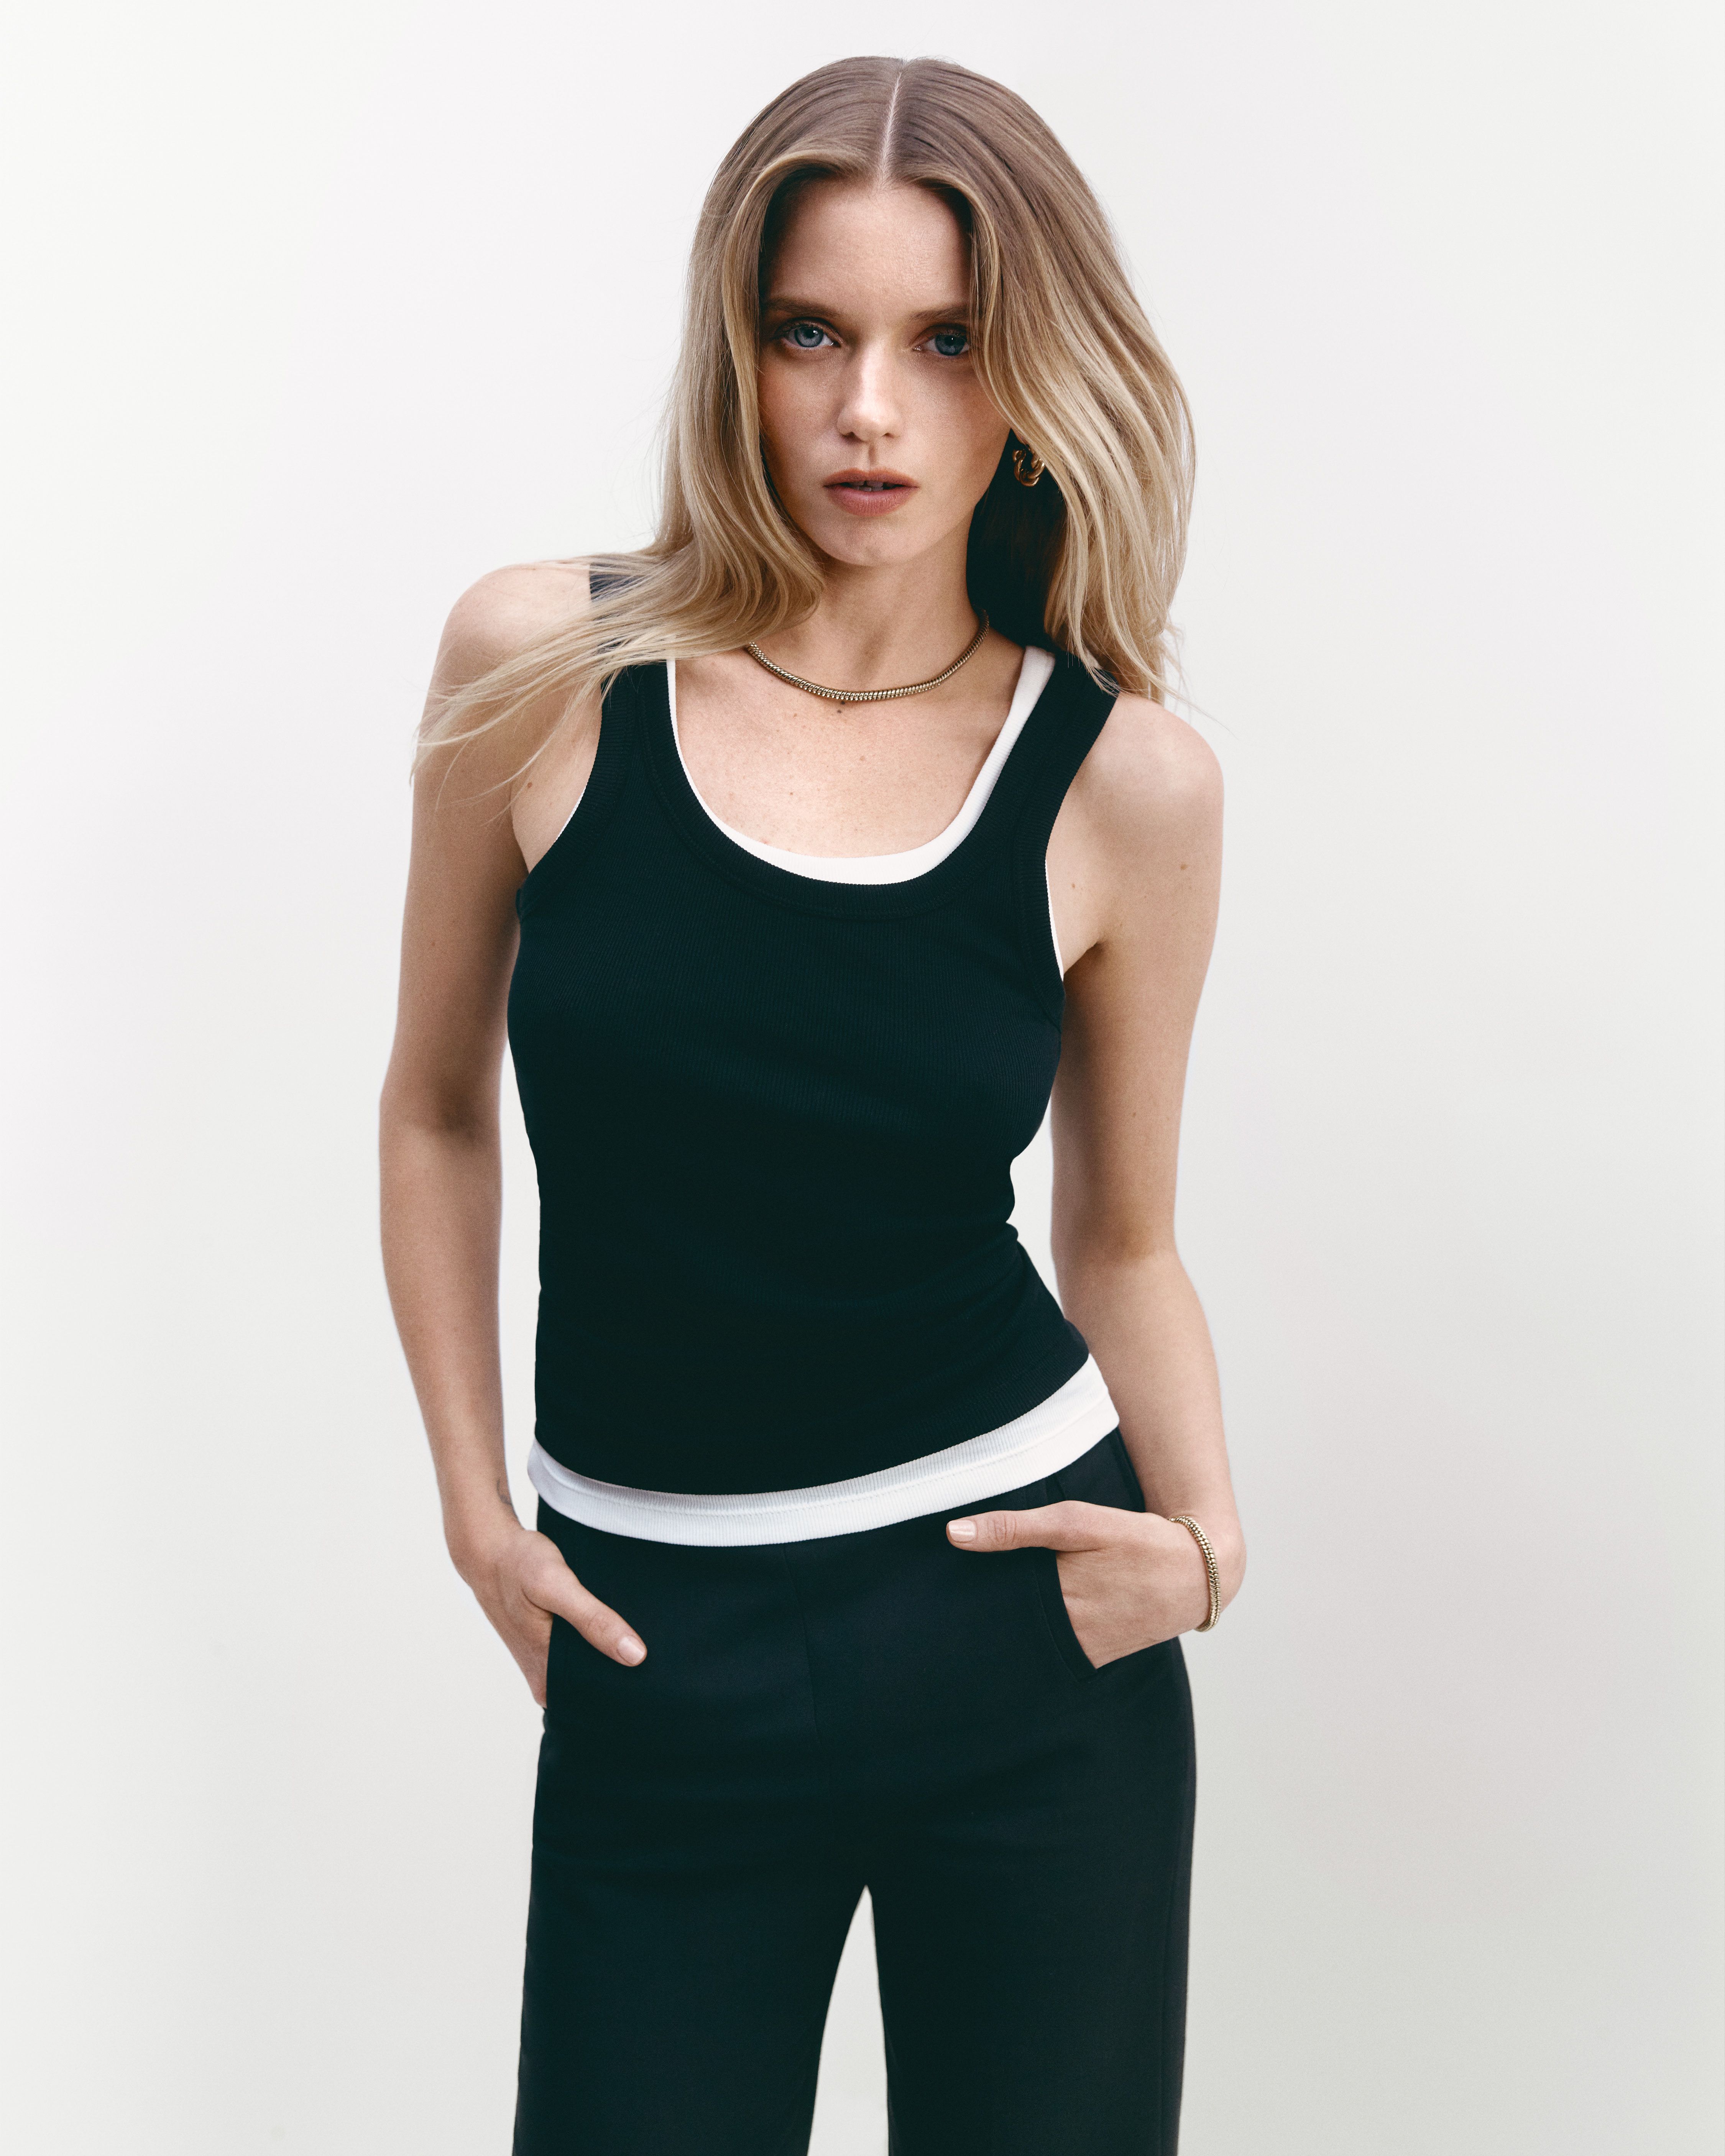 Abbey Lee standing with hands in pockets wearing black and white singlets layered and black trousers